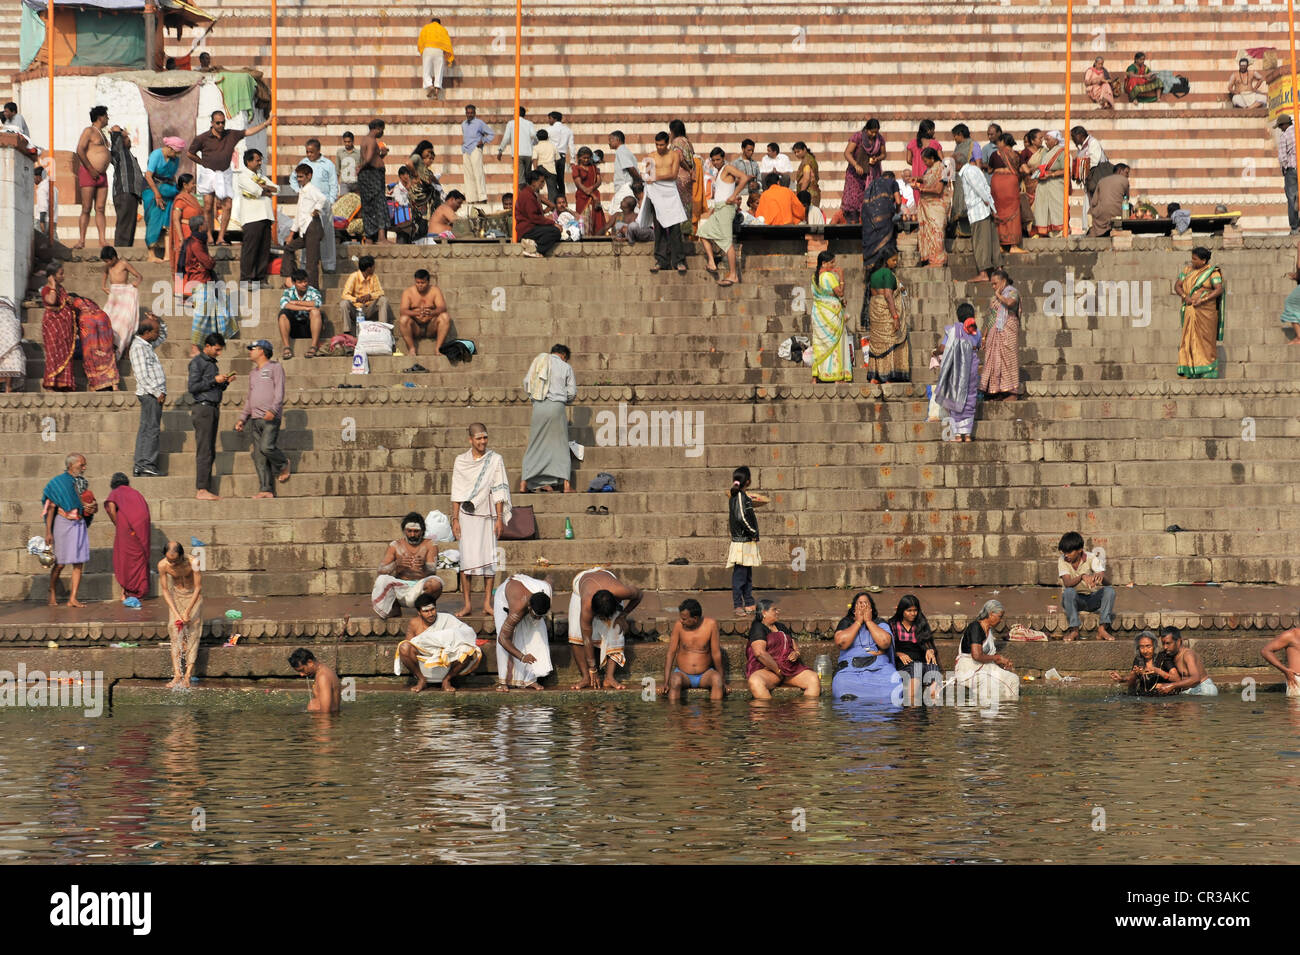 Believers during the ritual washing on the banks of the Ganges River in Varanasi, Benares, Uttar Pradesh, India, South Asia Stock Photo